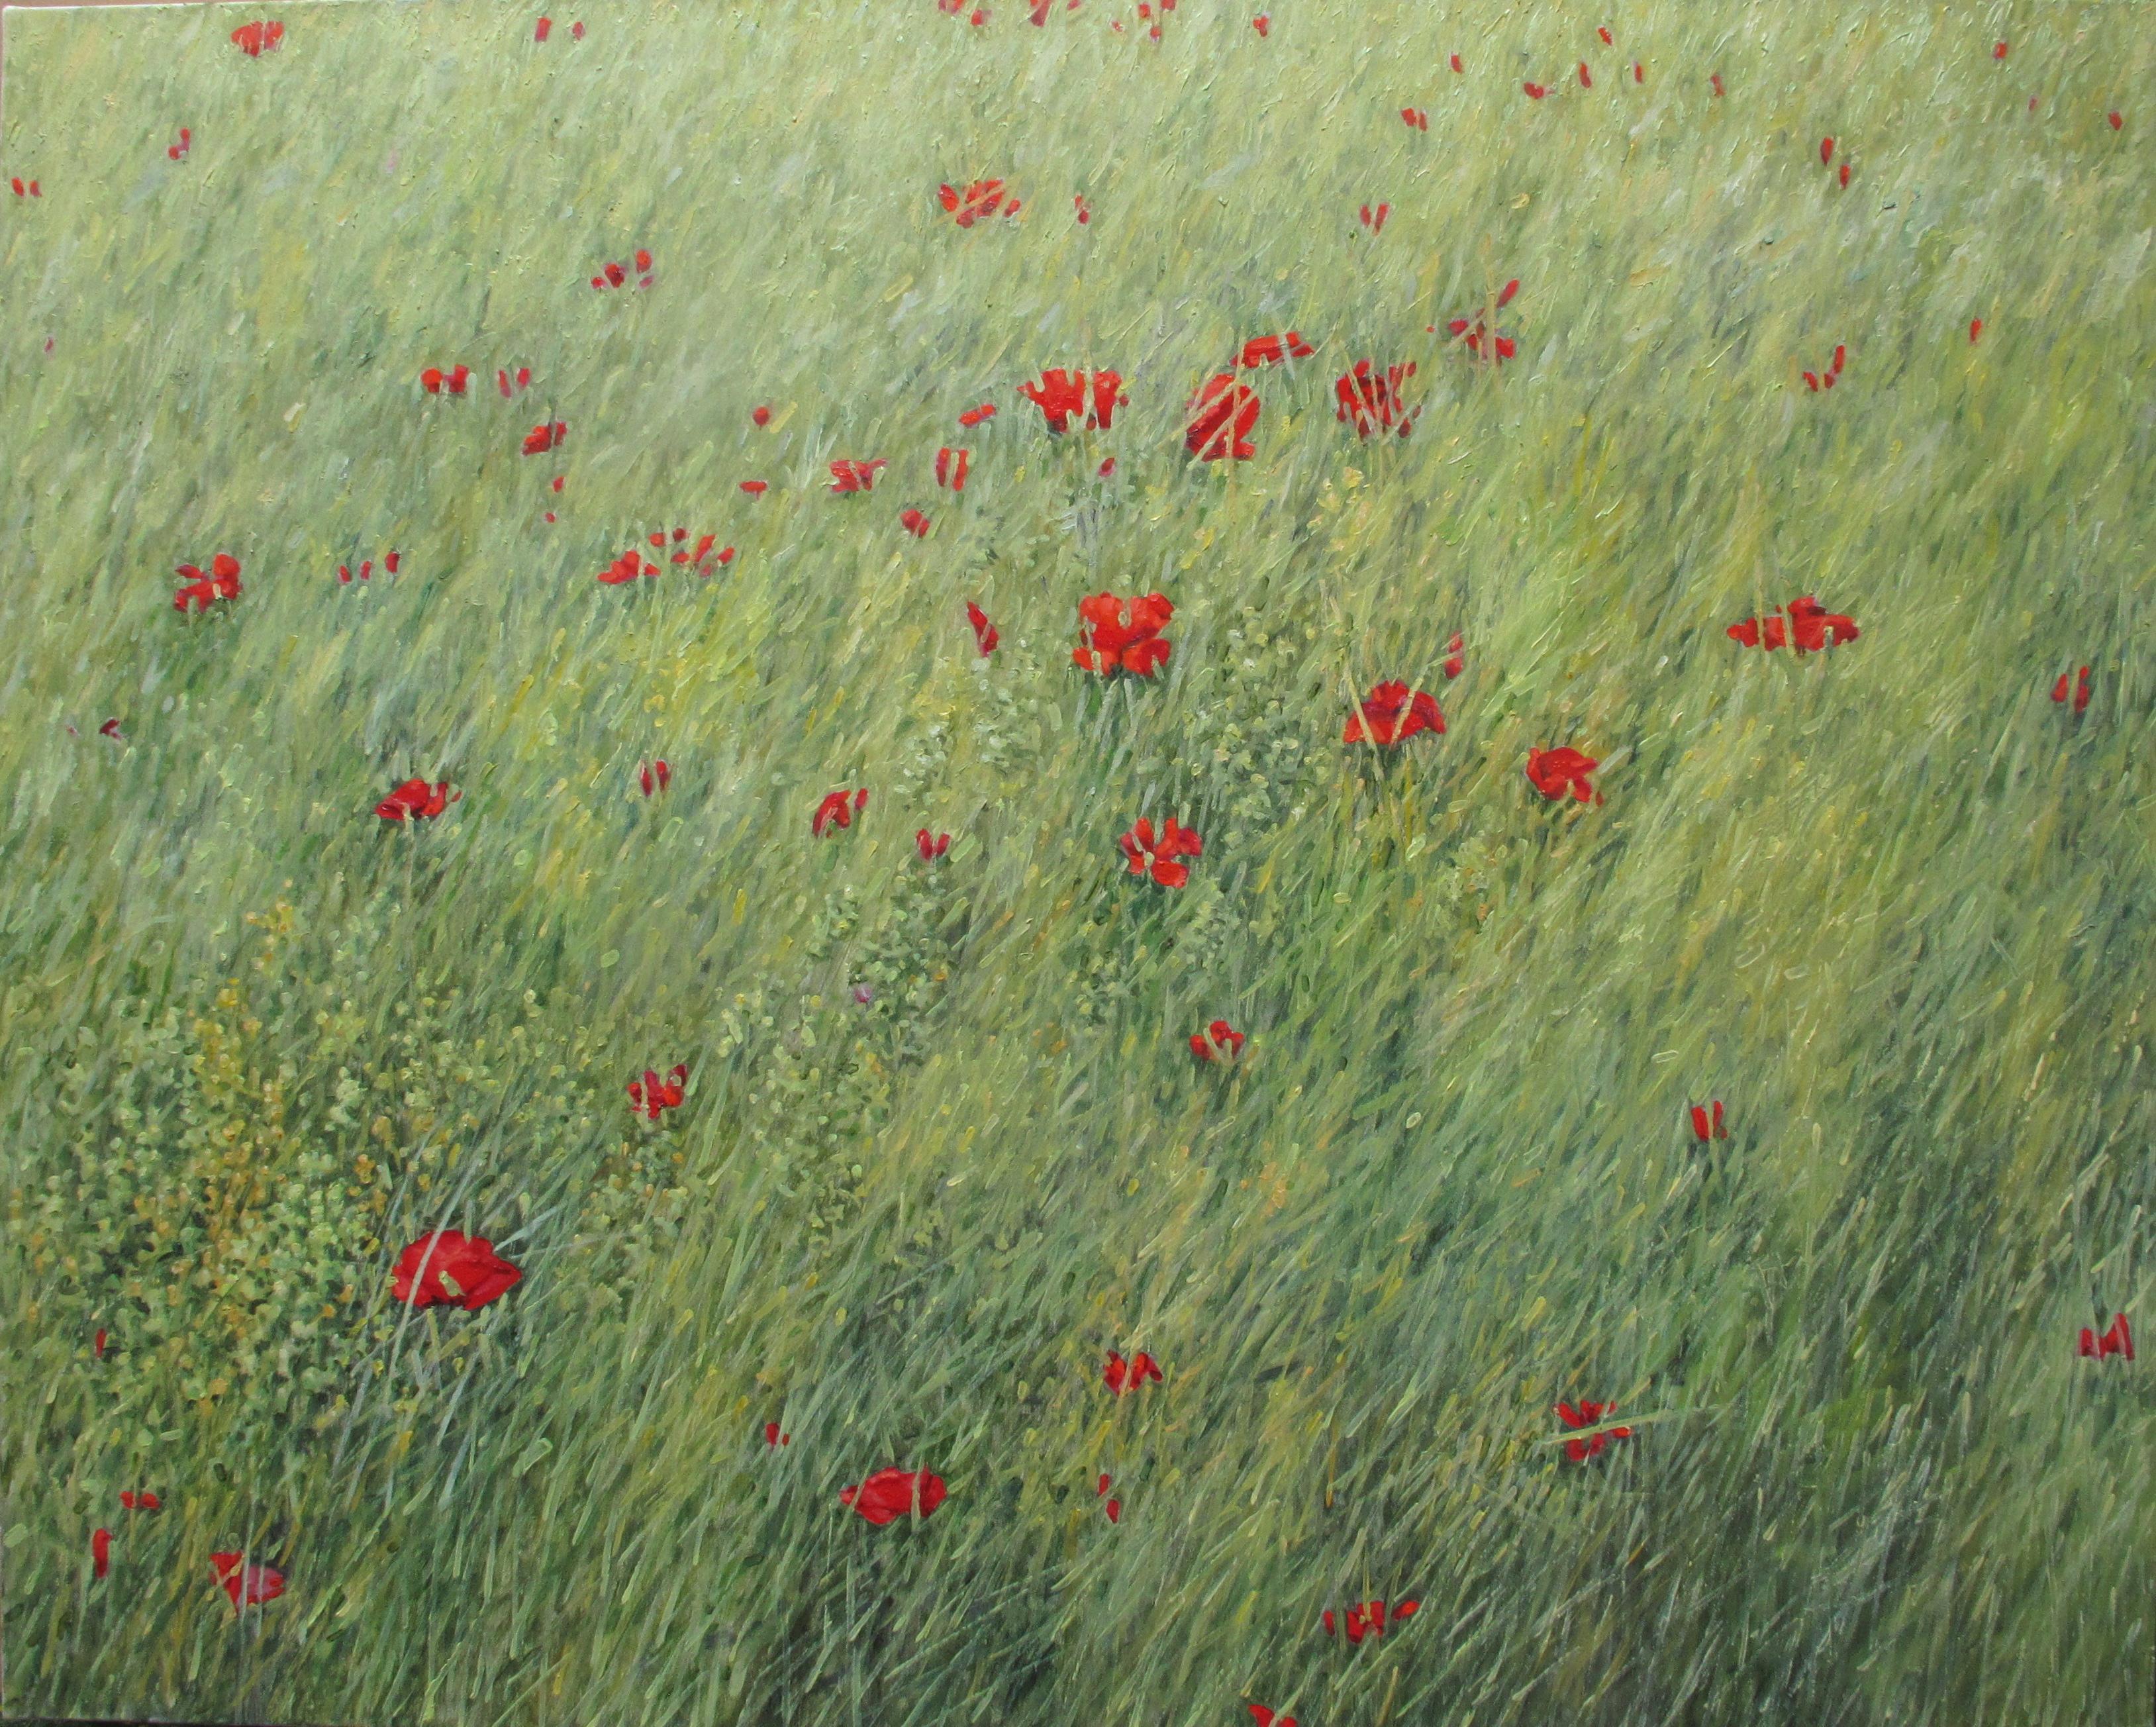 This horizontal landscape painting in oil on linen depicts a peaceful outdoor scene of delicately painted red flowers in a green grassy field, beautifully capturing the idyllic feel of a field of grass and wild poppies. 

Signed, dated and titled on